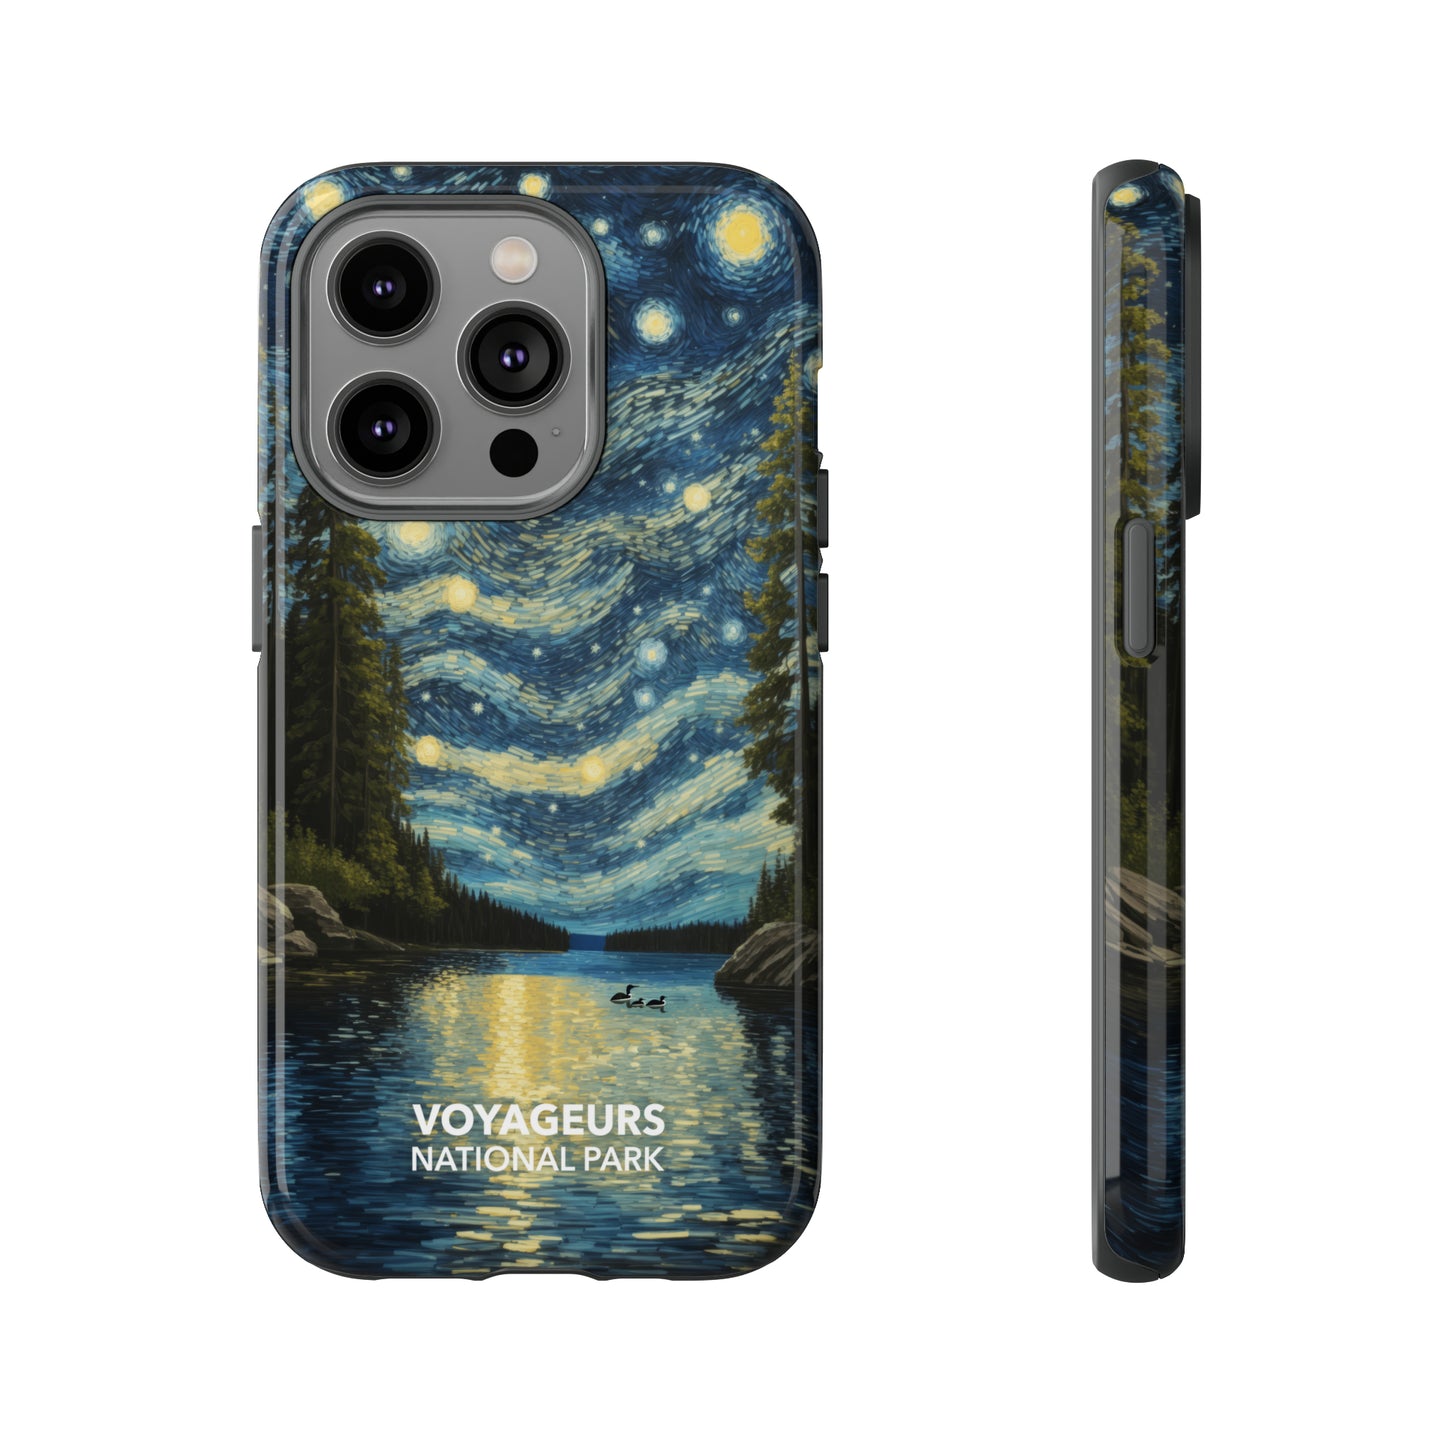 Voyageurs National Park Phone Case - Starry Night